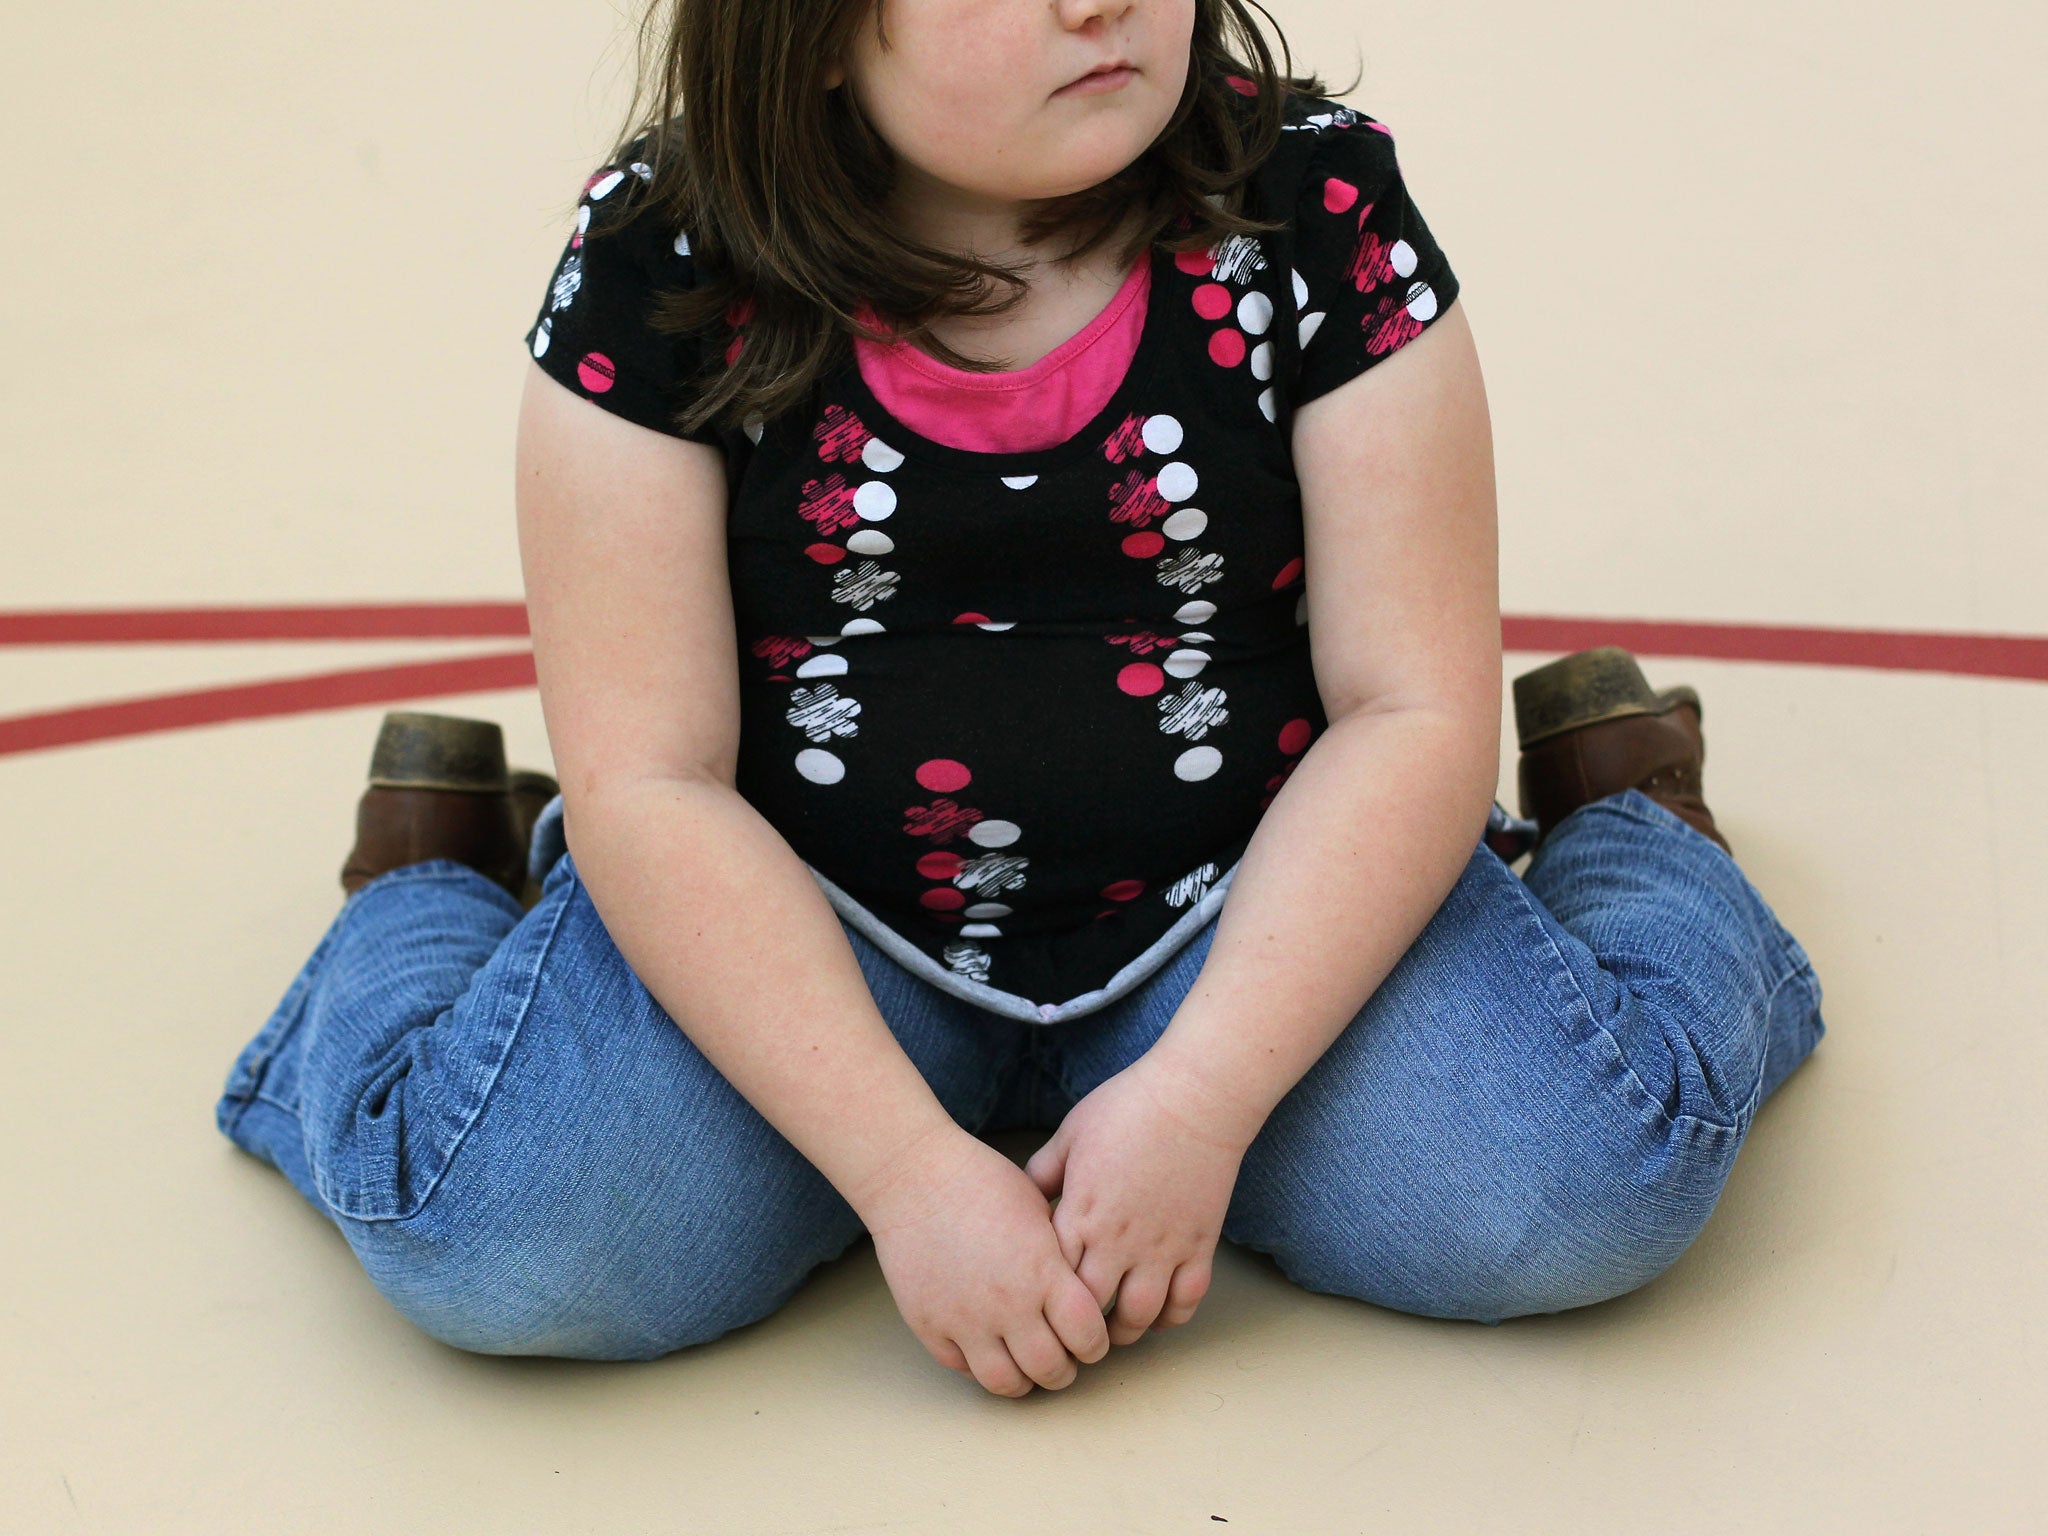 A child sits on a gym floor.